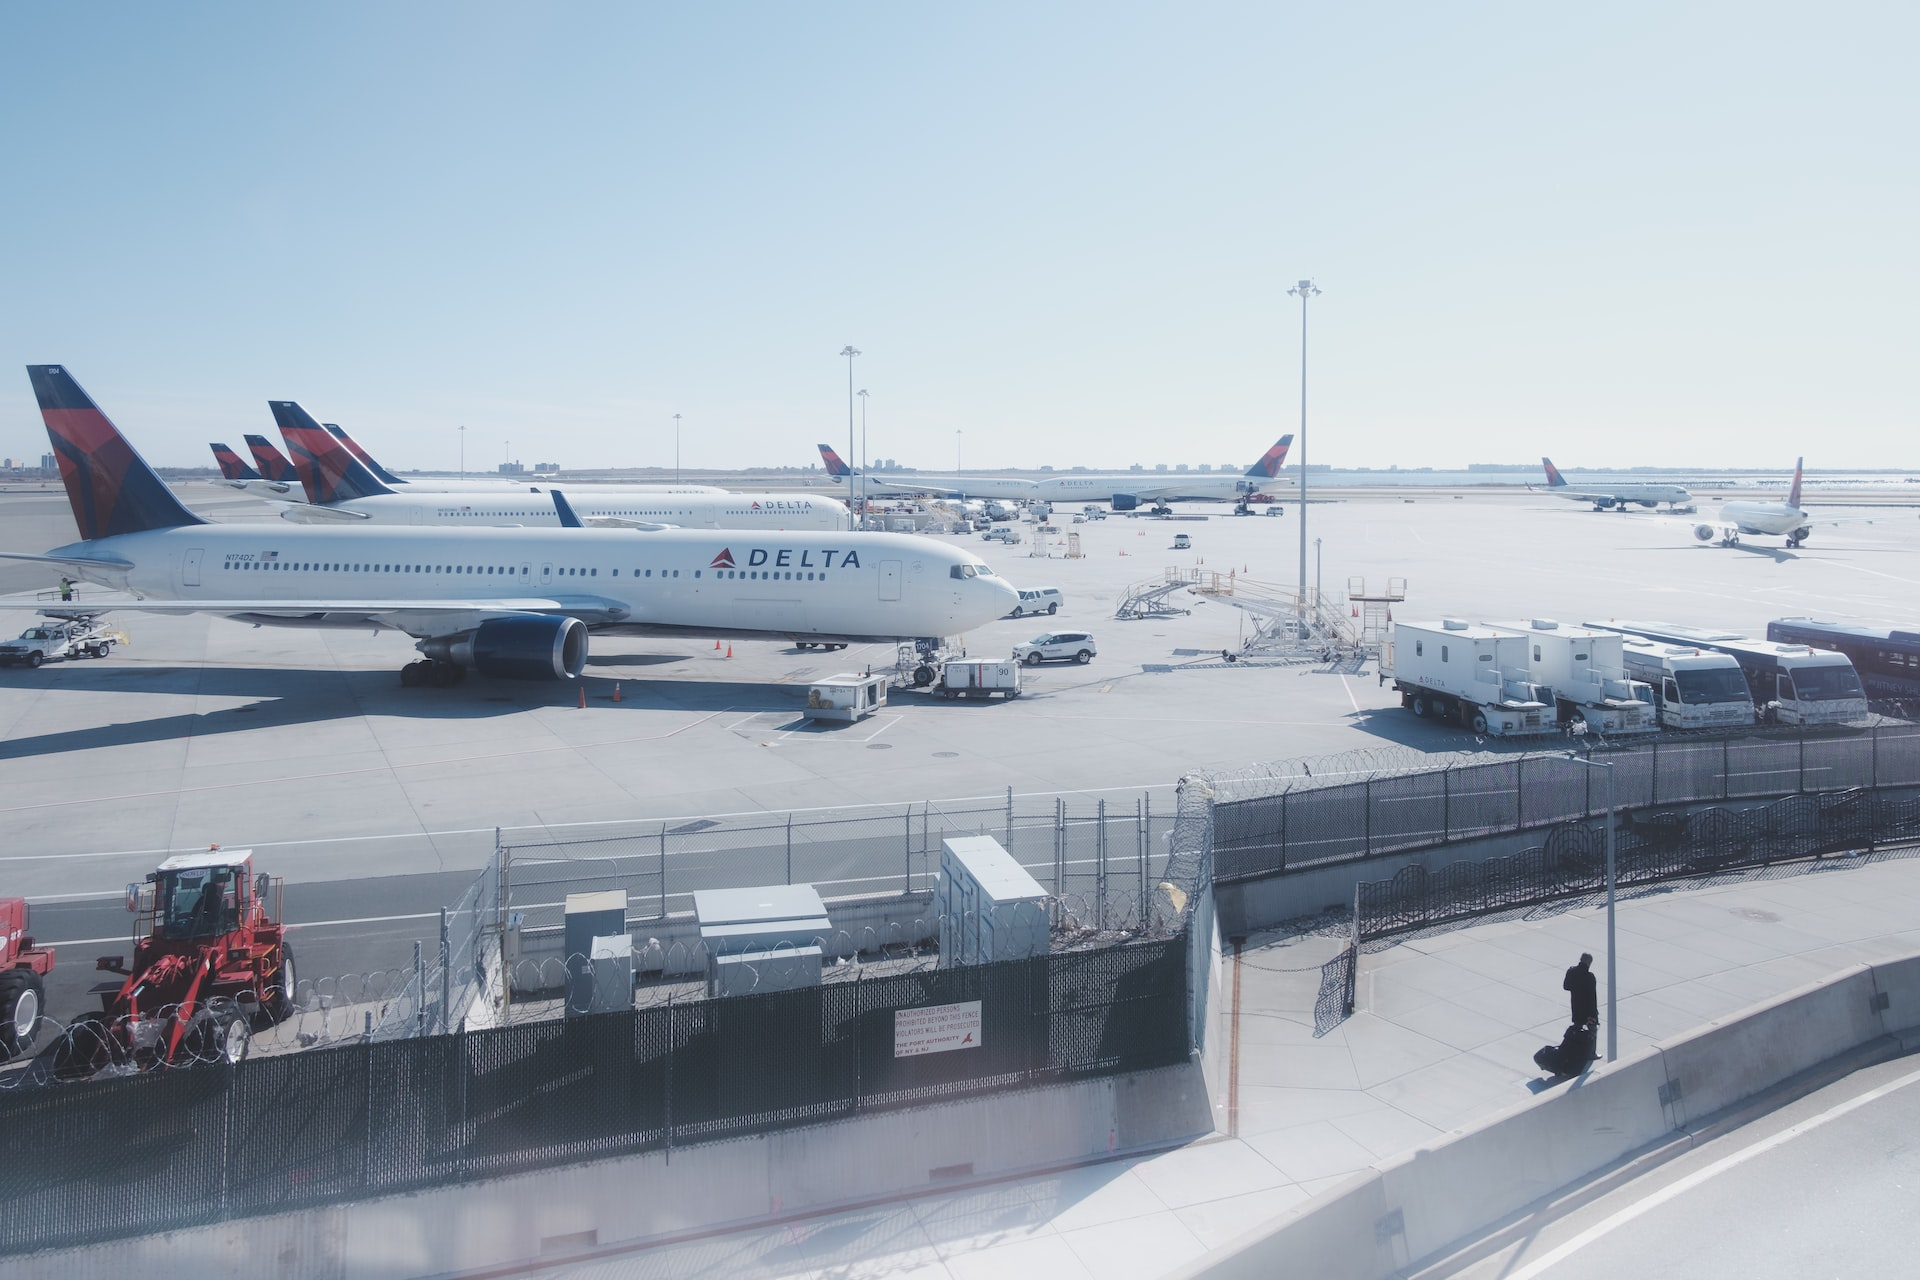 The tarmac and parked aircraft at JFK airport in New York.